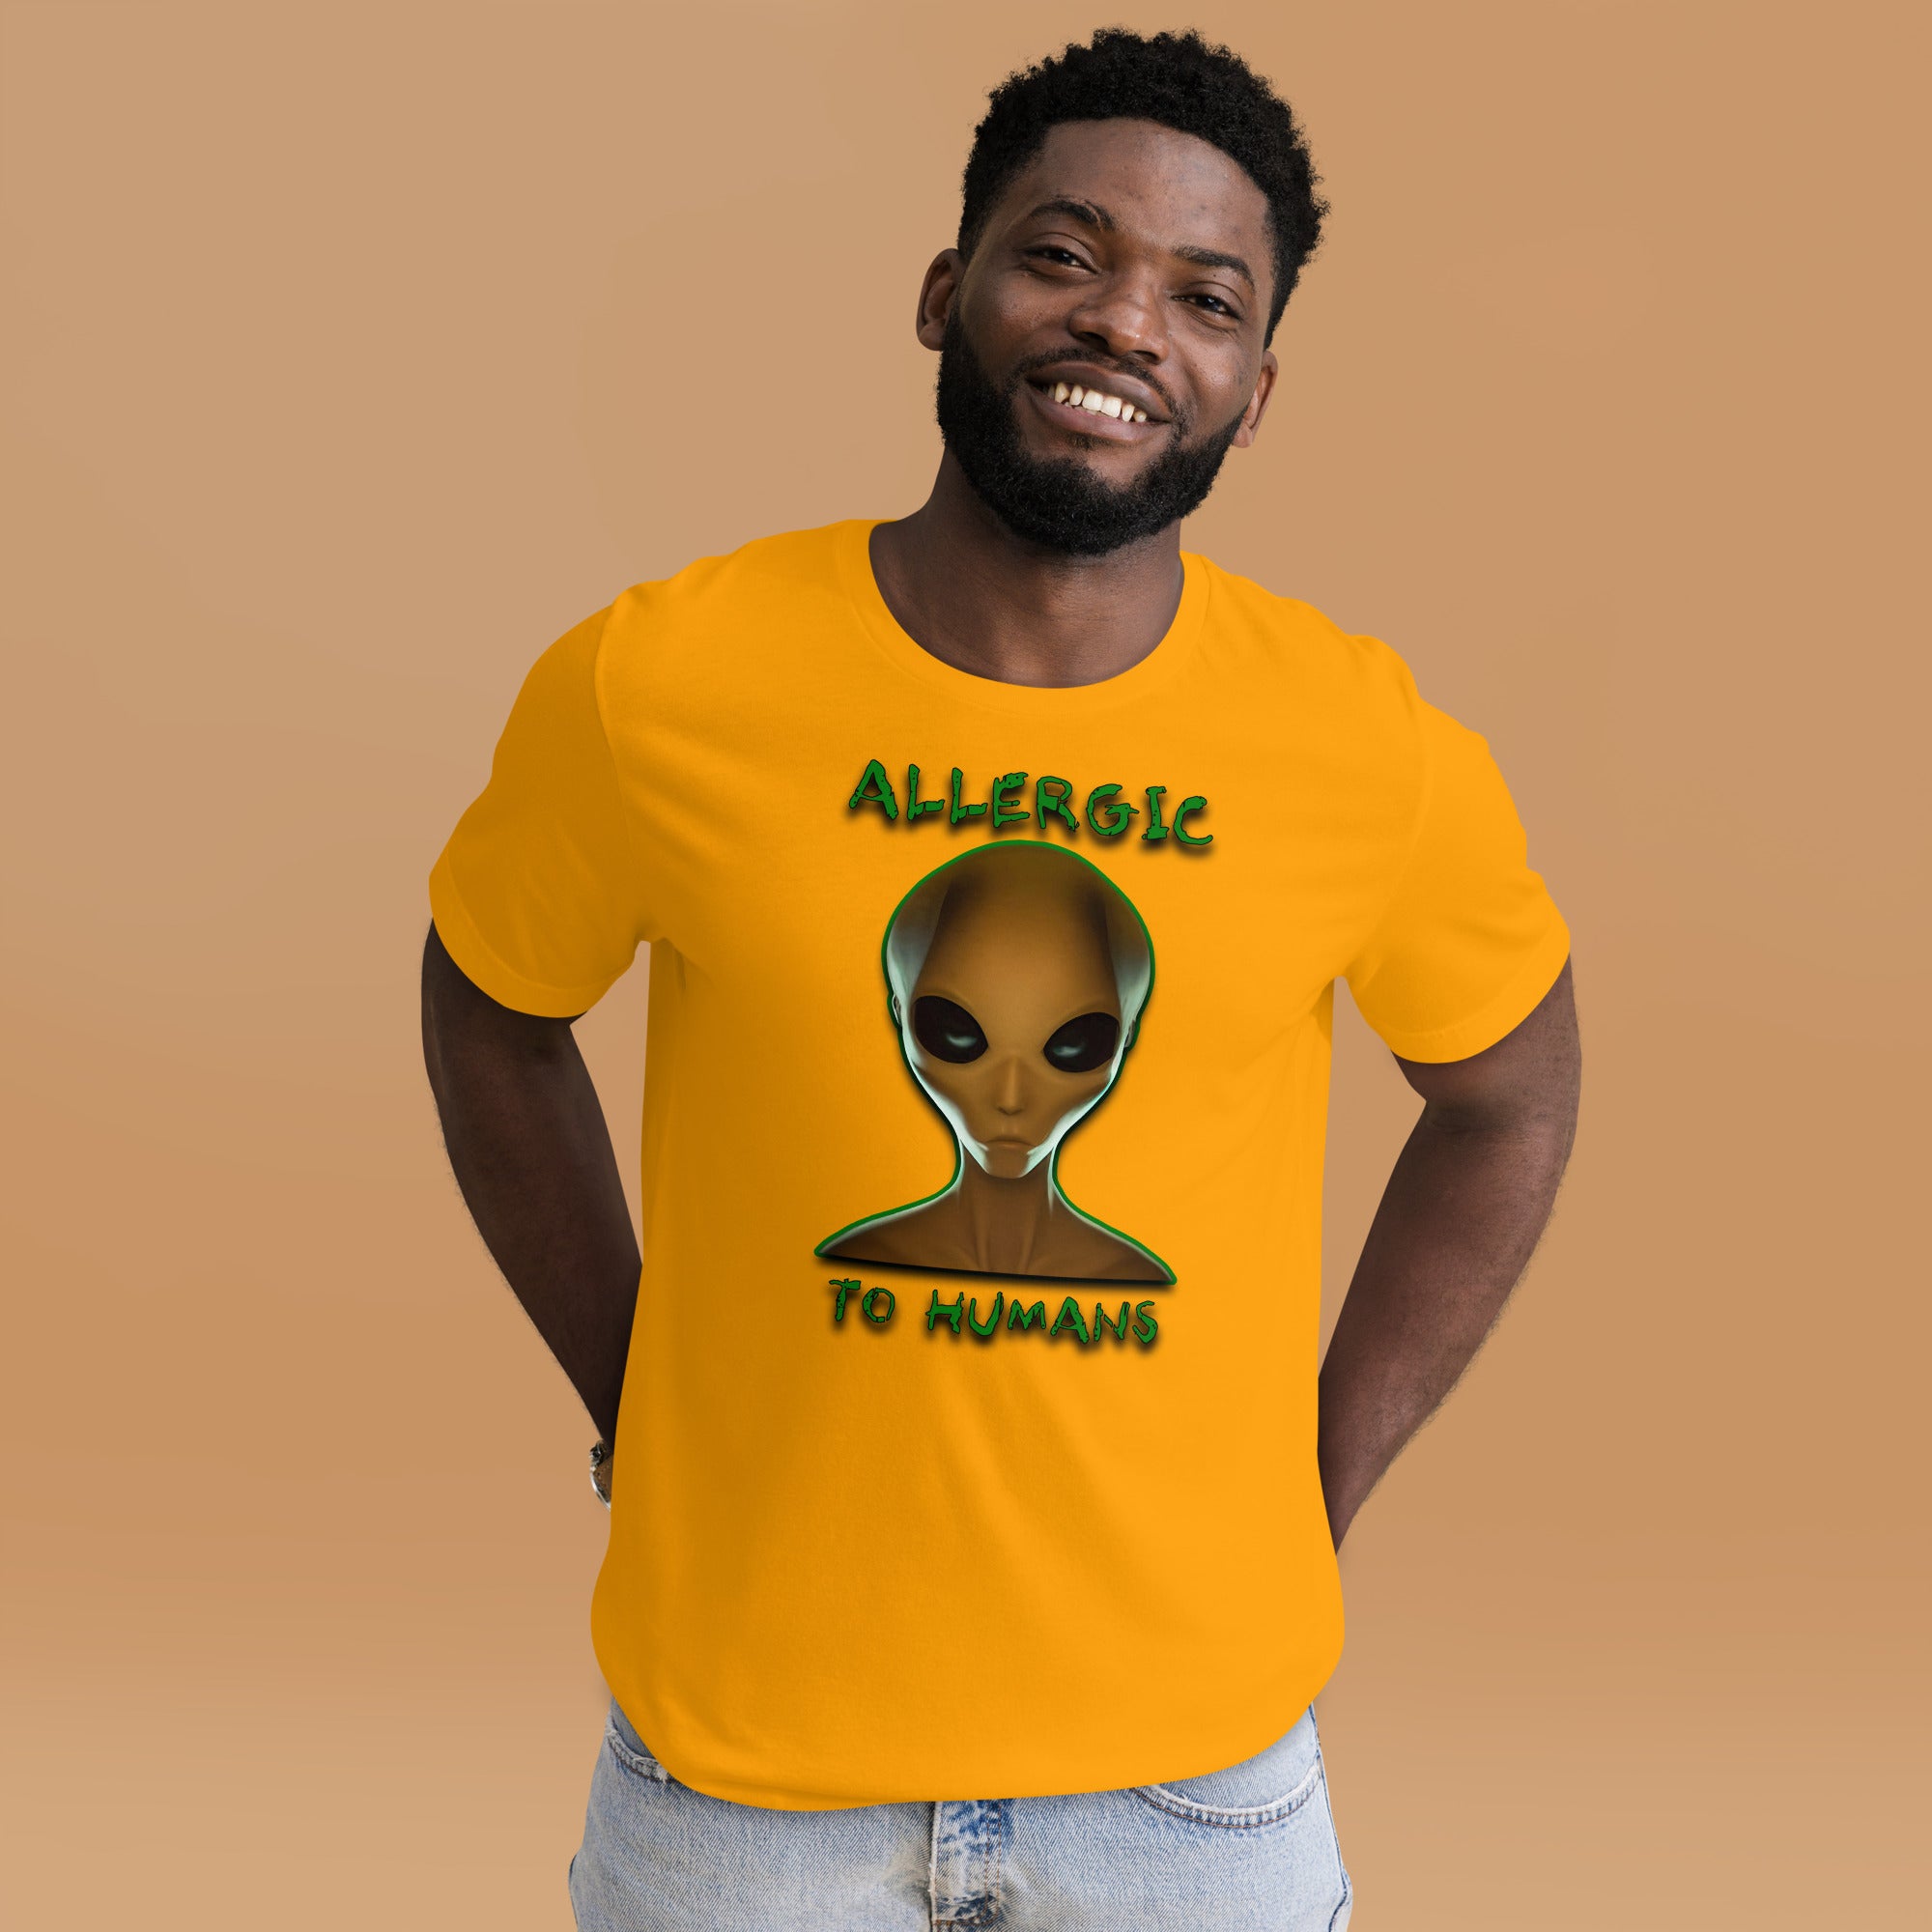 Allergic to humans Unisex t-shirt